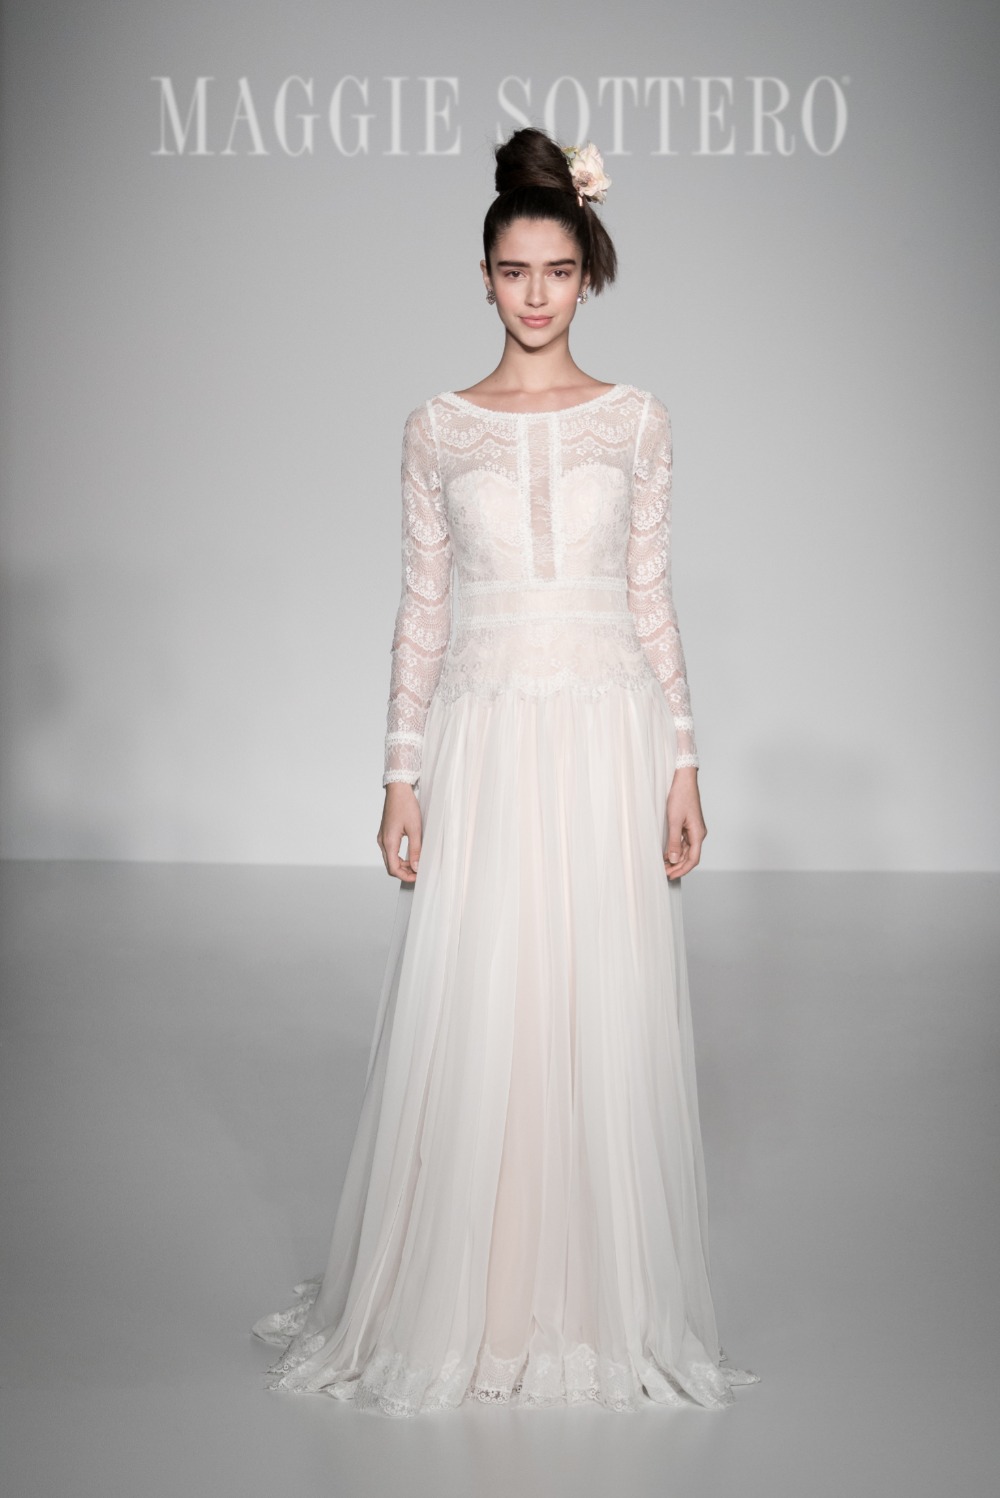 Maggie Sottero Fall 2016 Bridal Collection